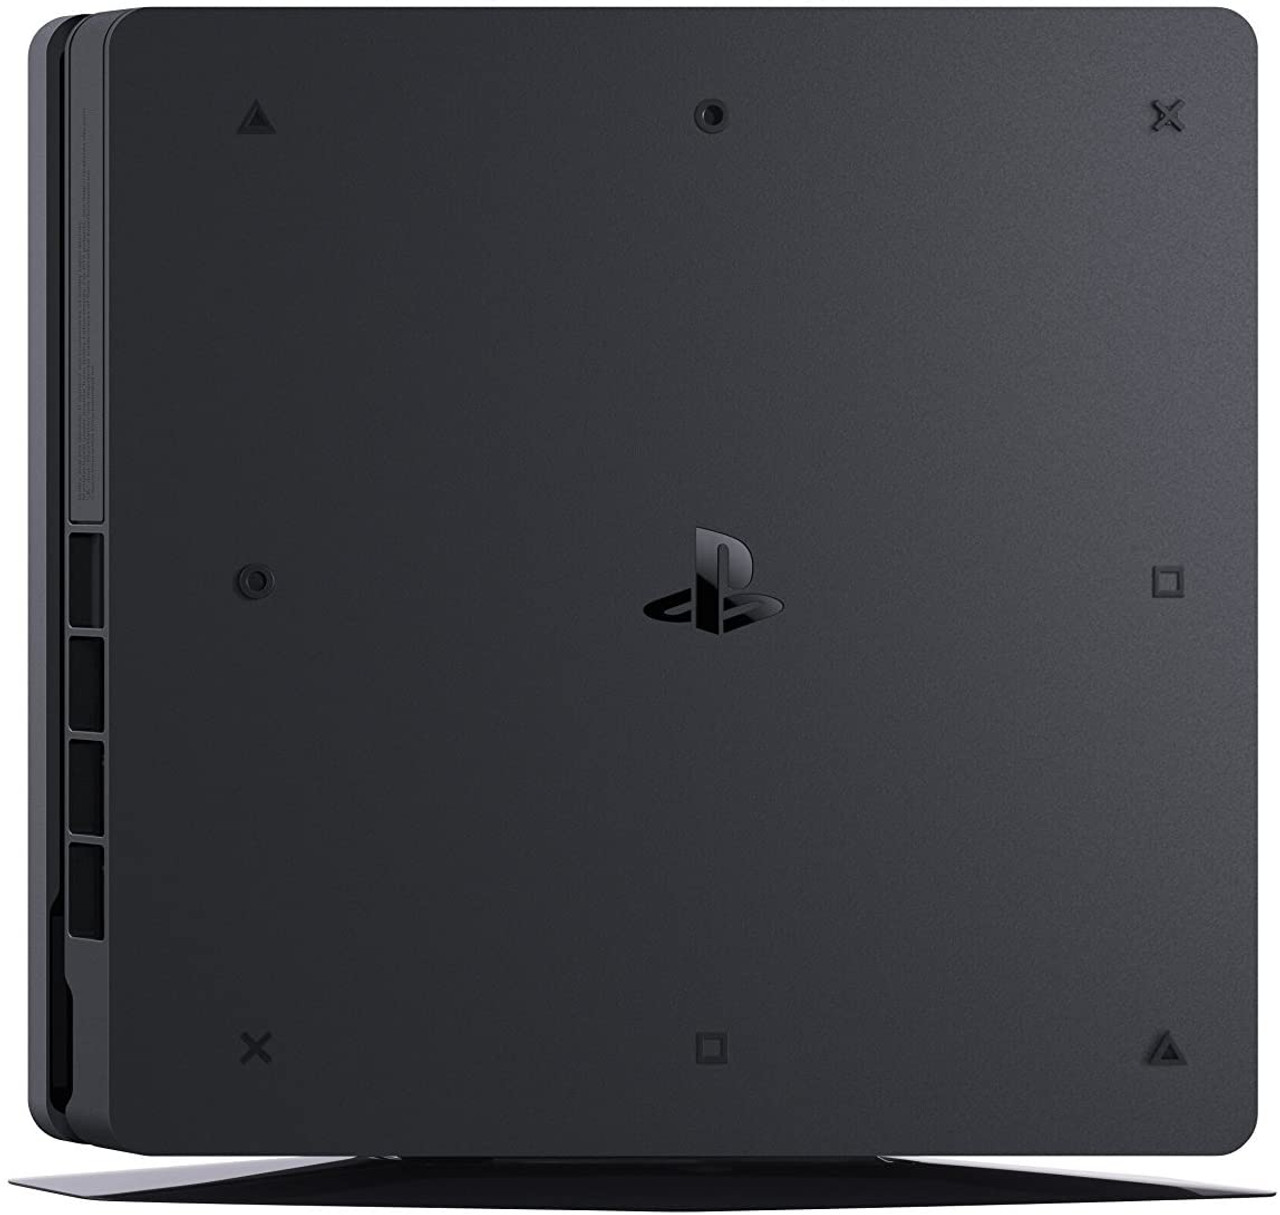 Sony PS4 500GB - ASK Outlets Ltd